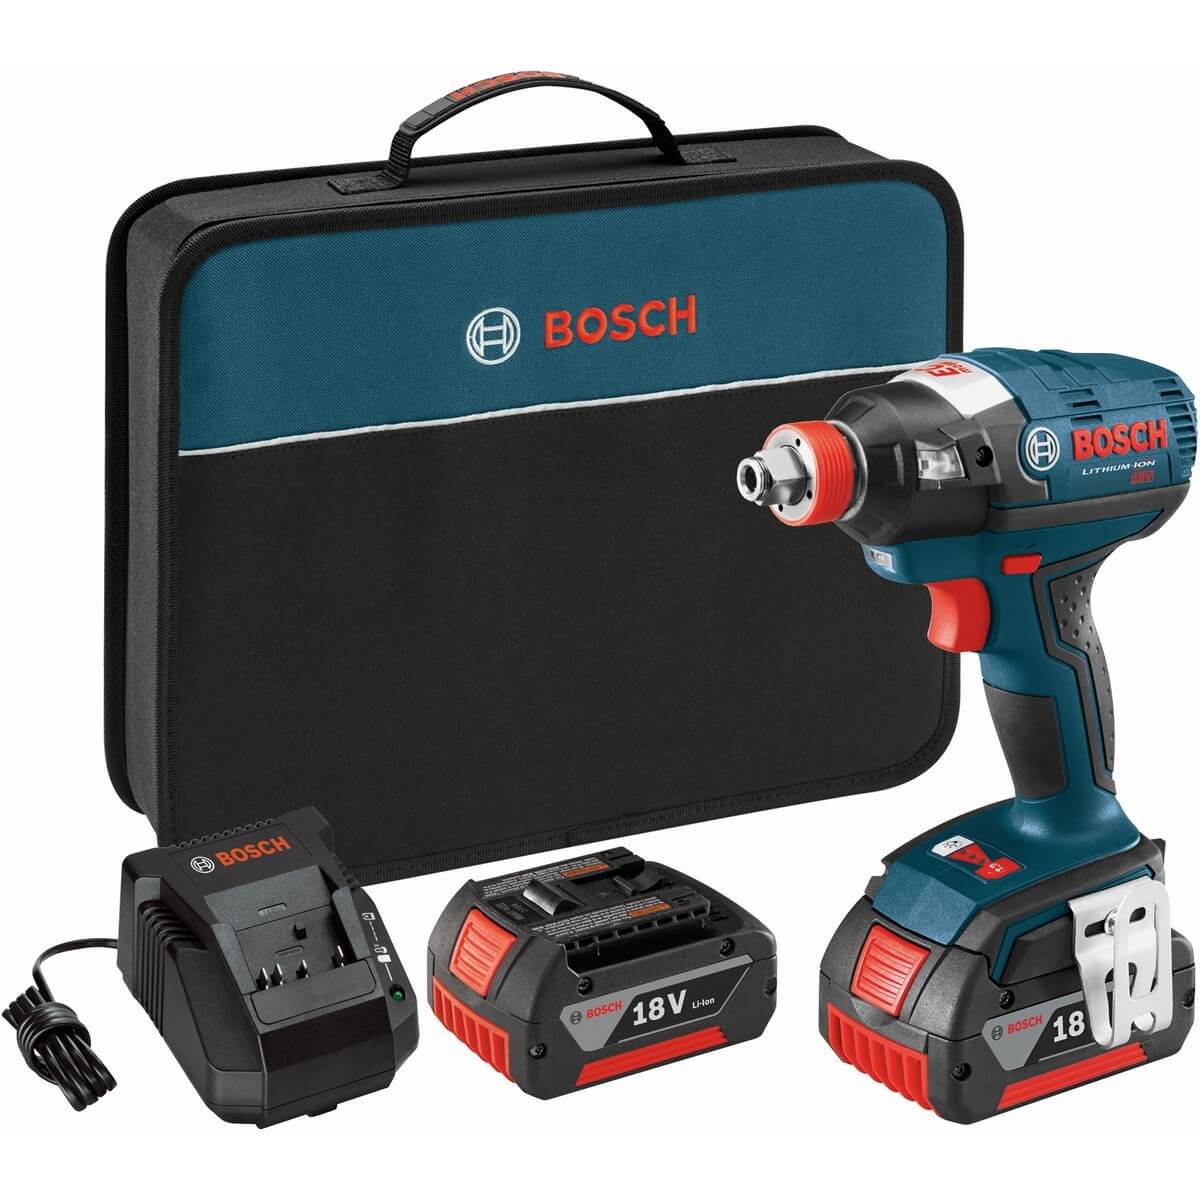 BOSCH, Bosch IDH182-01 18V Brushless Socket Ready Impact Driver with 2 Batteries, Charg